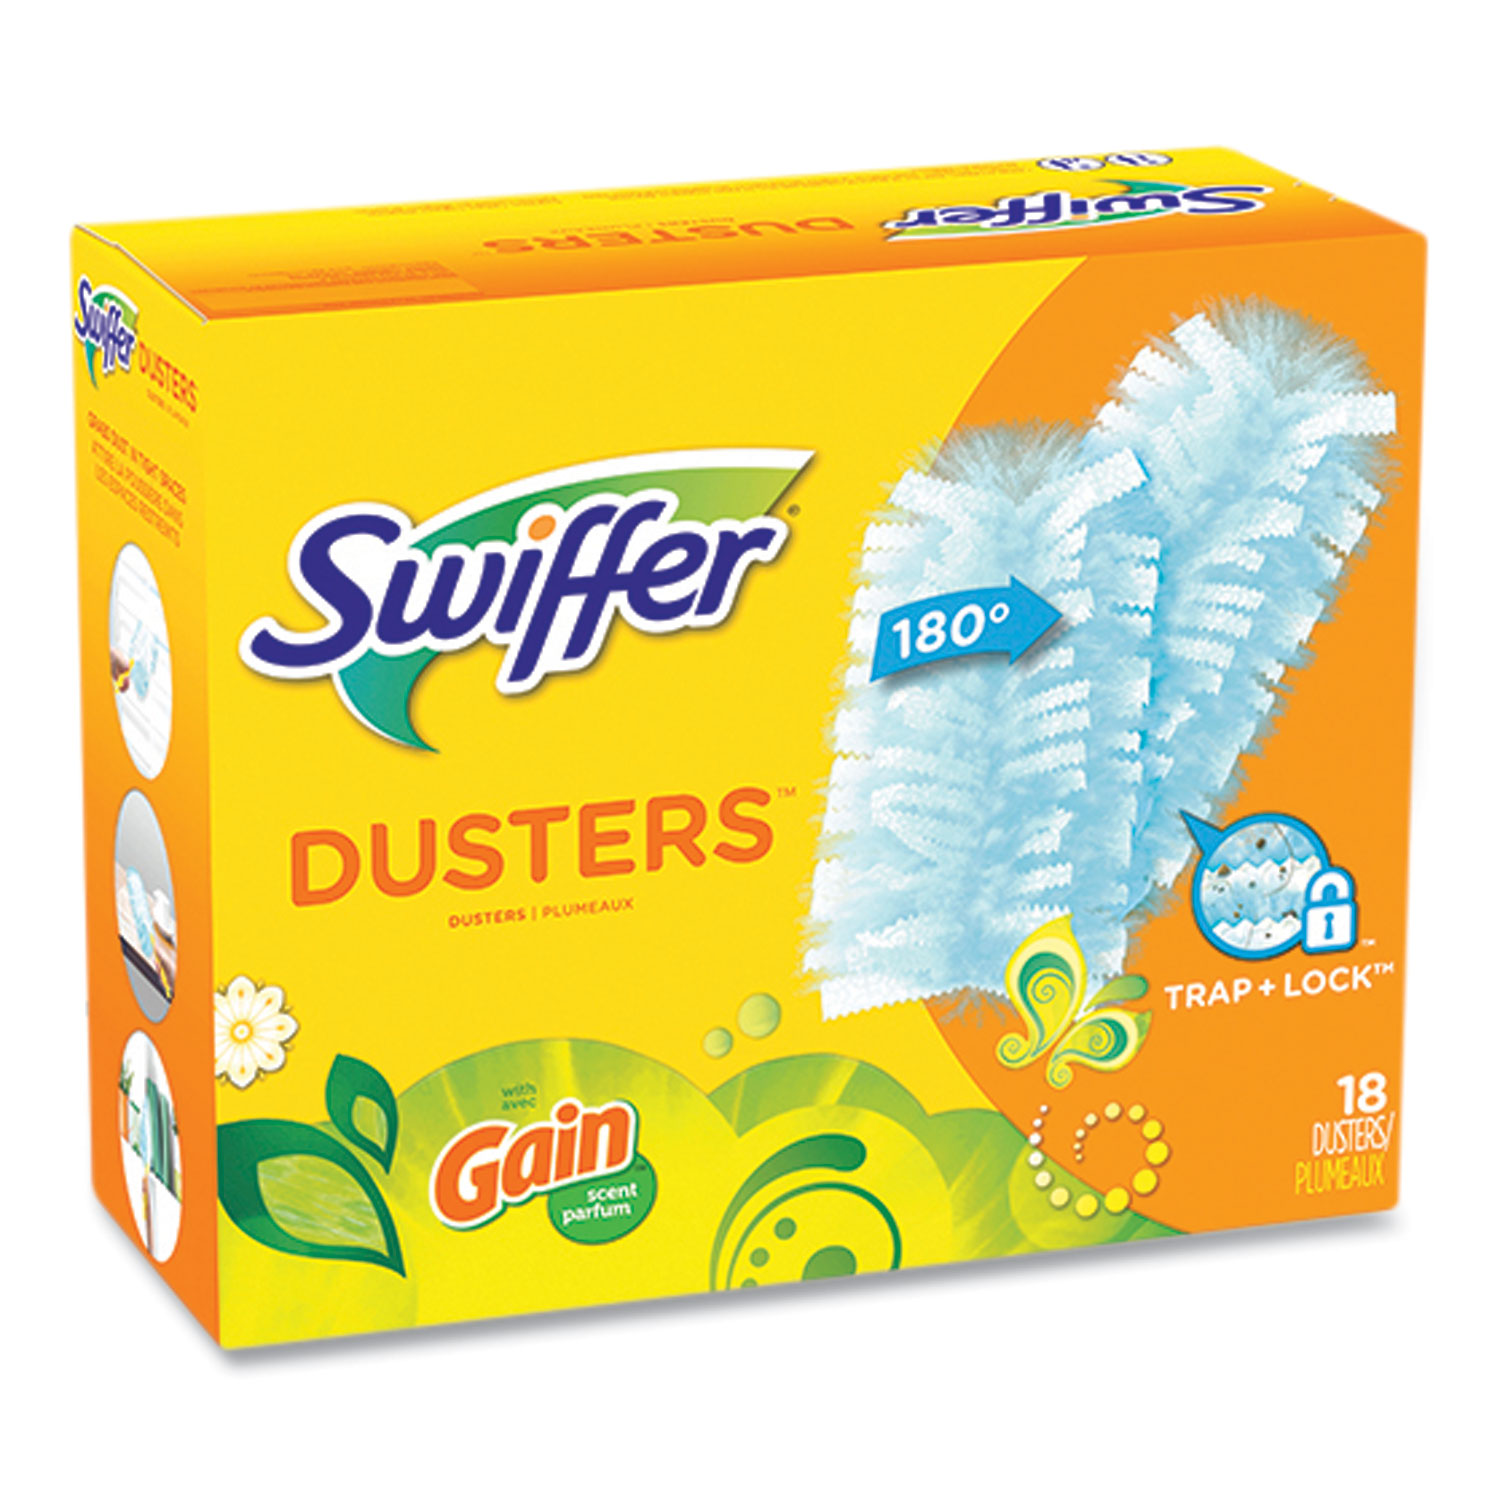  Swiffer Duster Kit with Handle + 5 Feather Dusters : Health &  Household